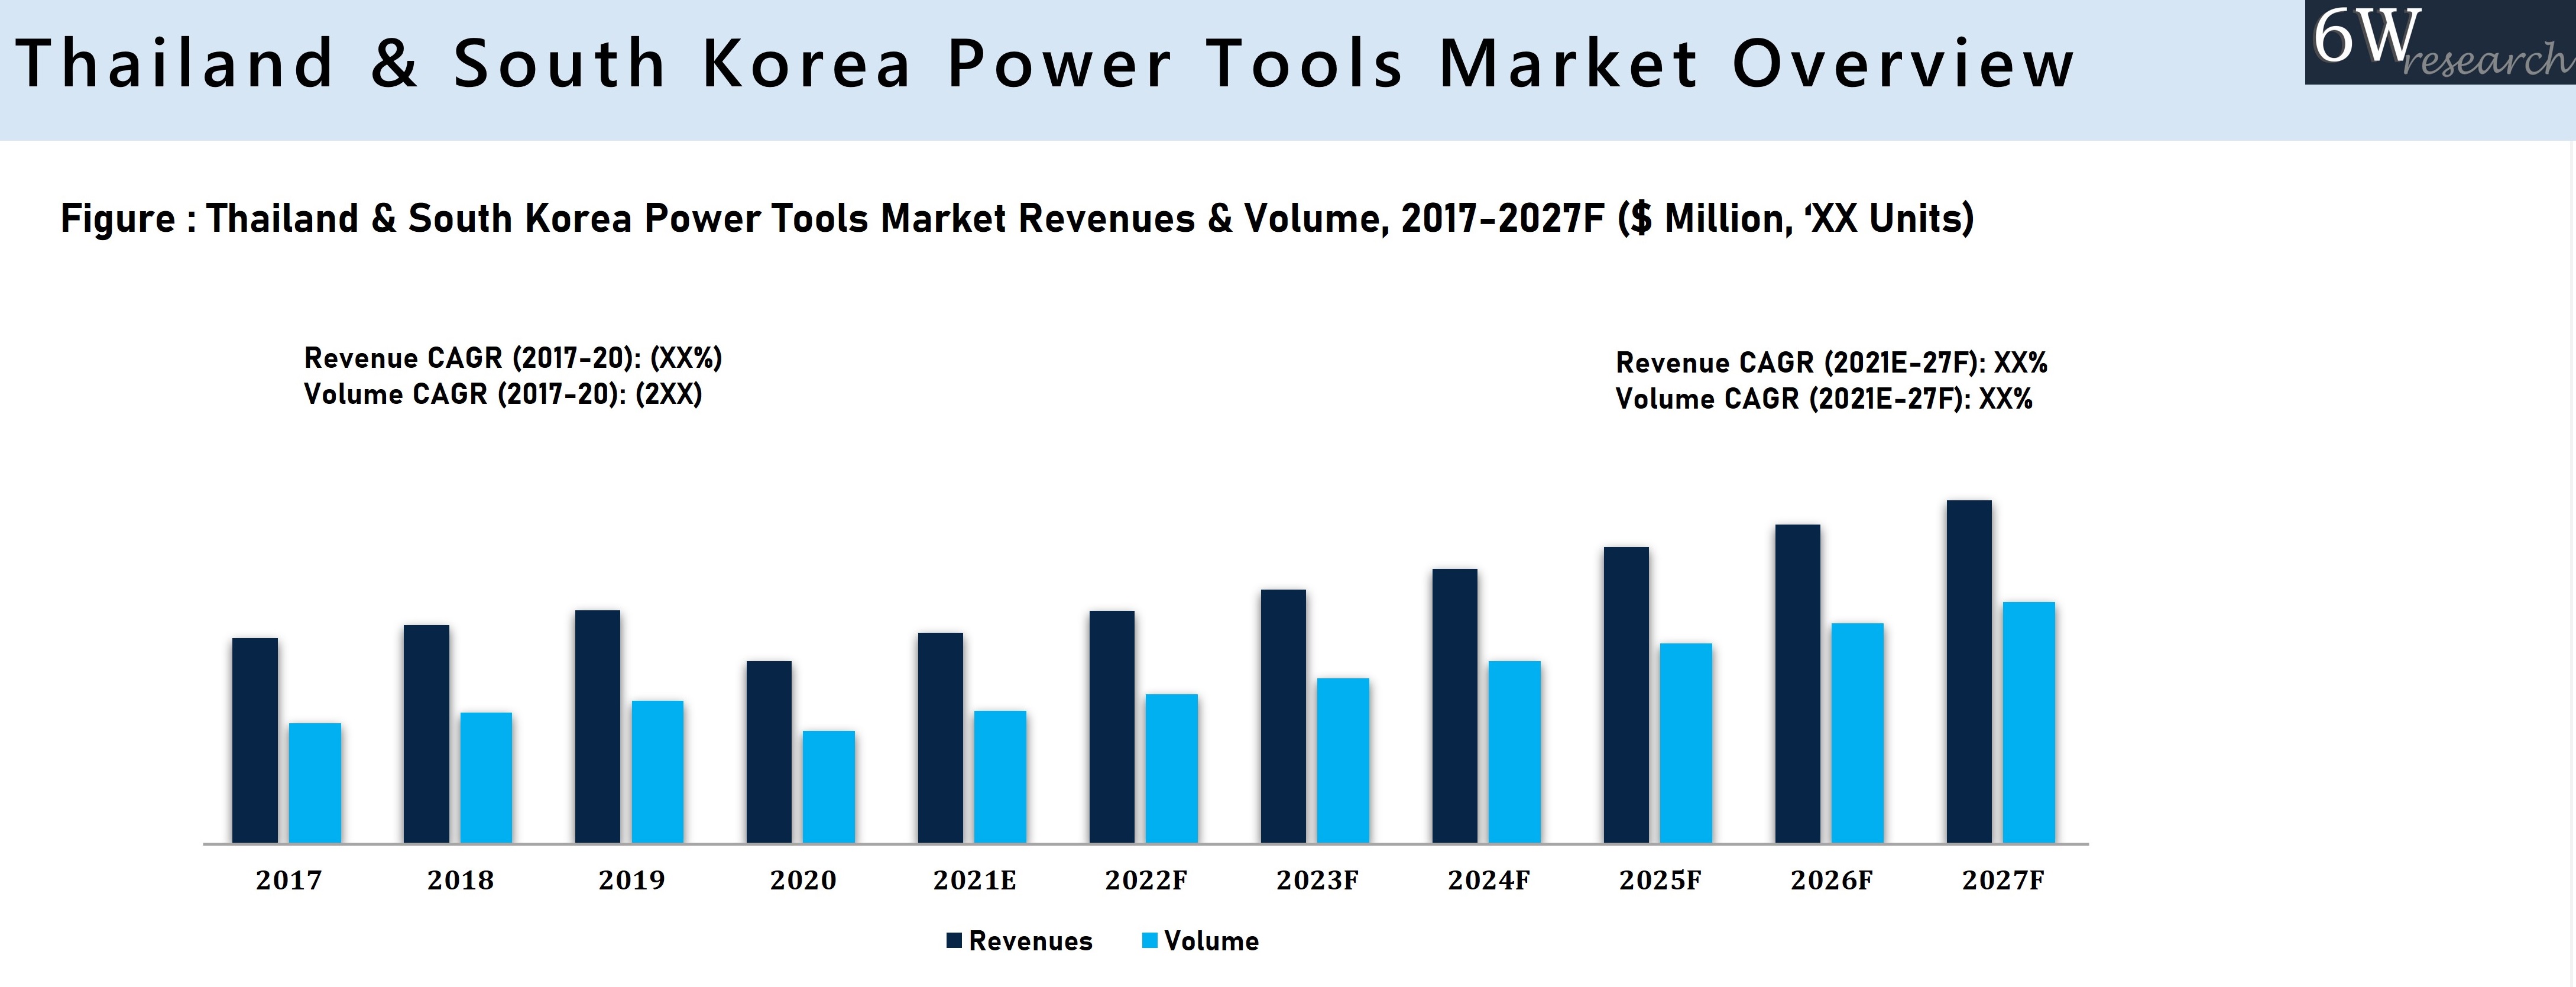 Thailand and South Korea Power Tools Market Overview